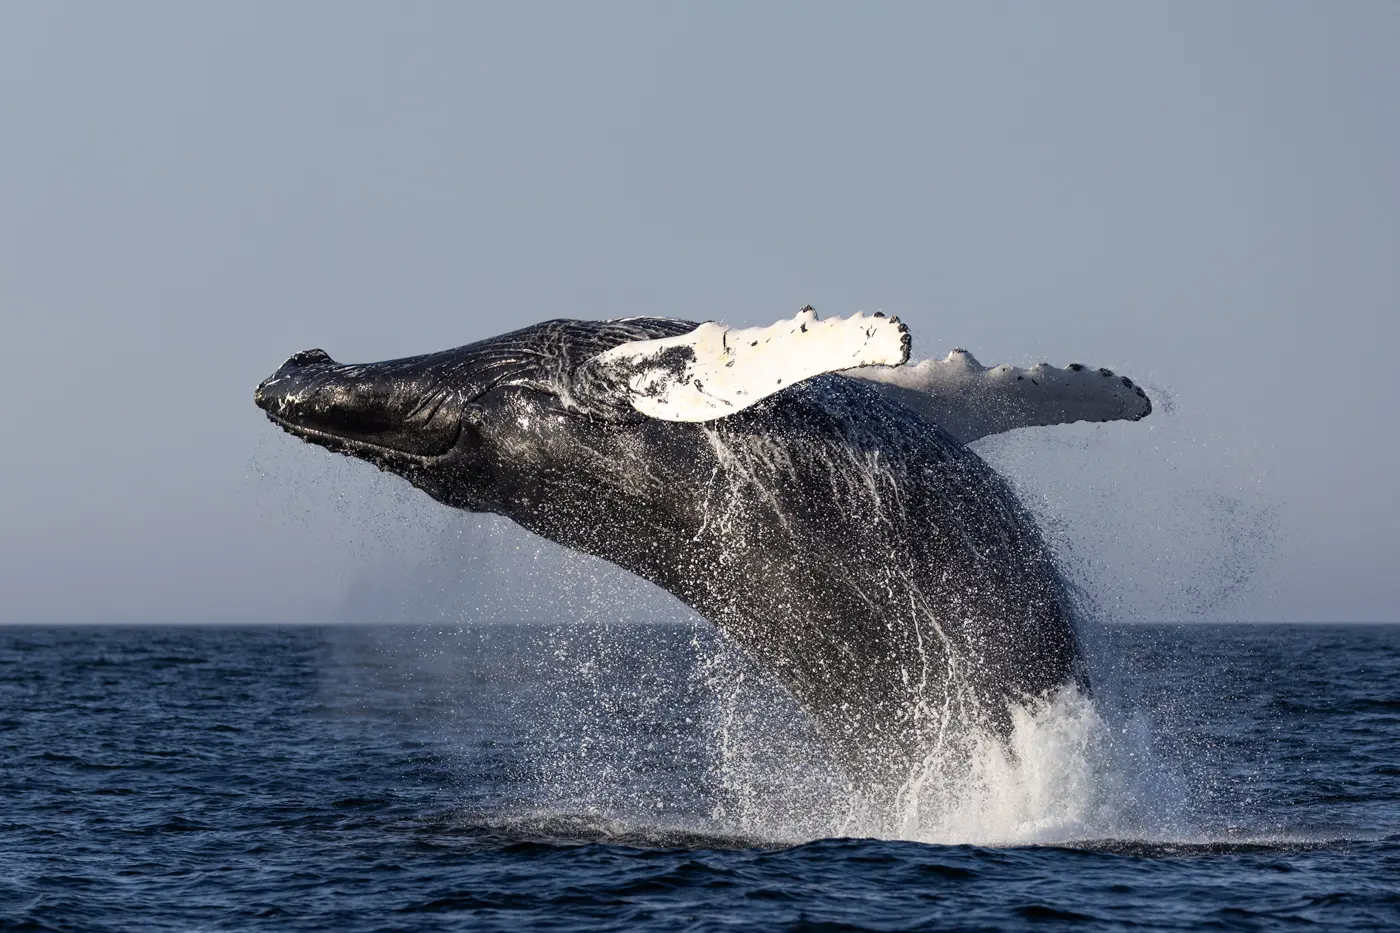 A big size whale jumping inside the water